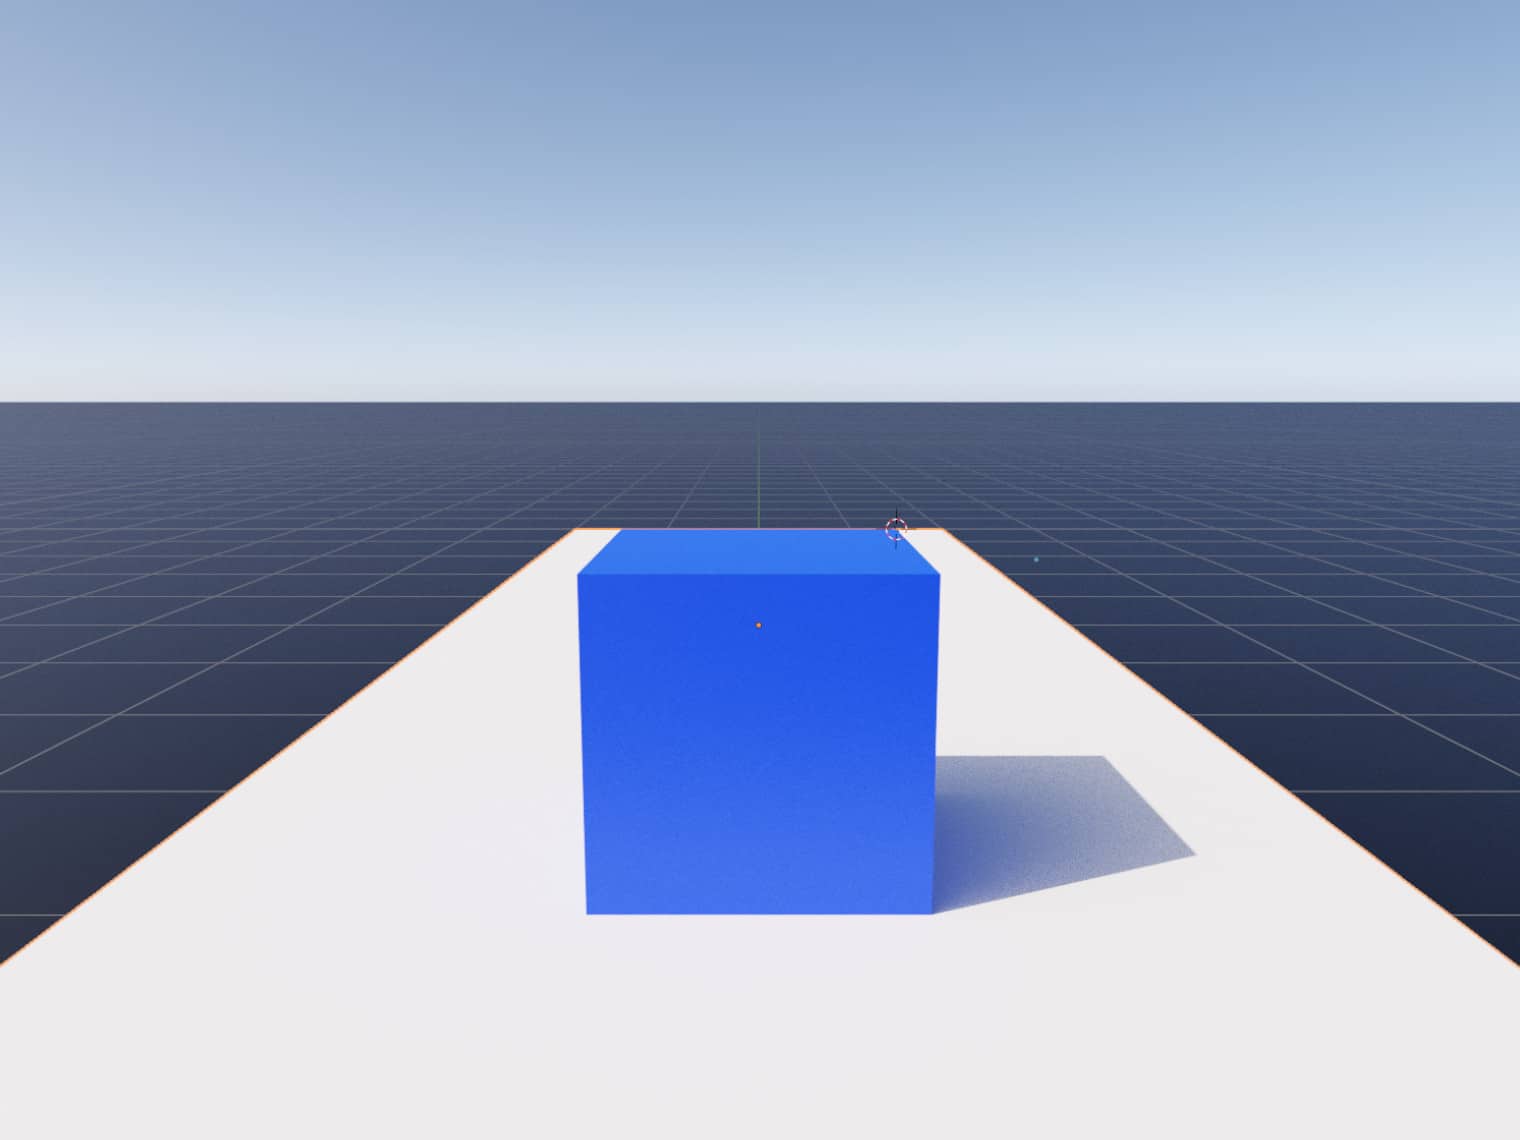 Front view of a 1x1 meter cube in 3D